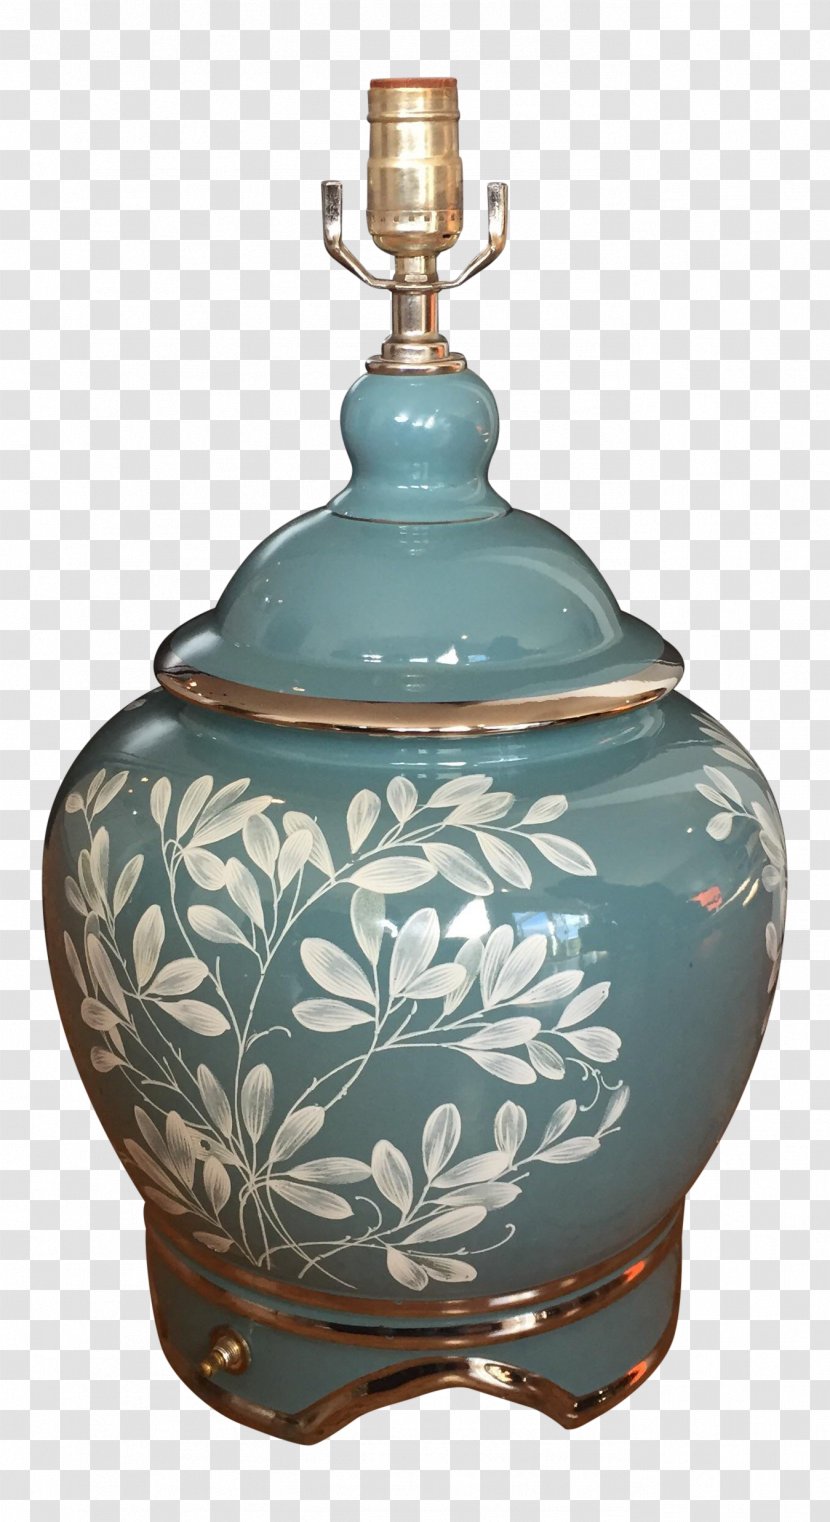 Ceramic Vase Urn Tableware Pottery - Turquoise - Hand-painted Lamp Transparent PNG